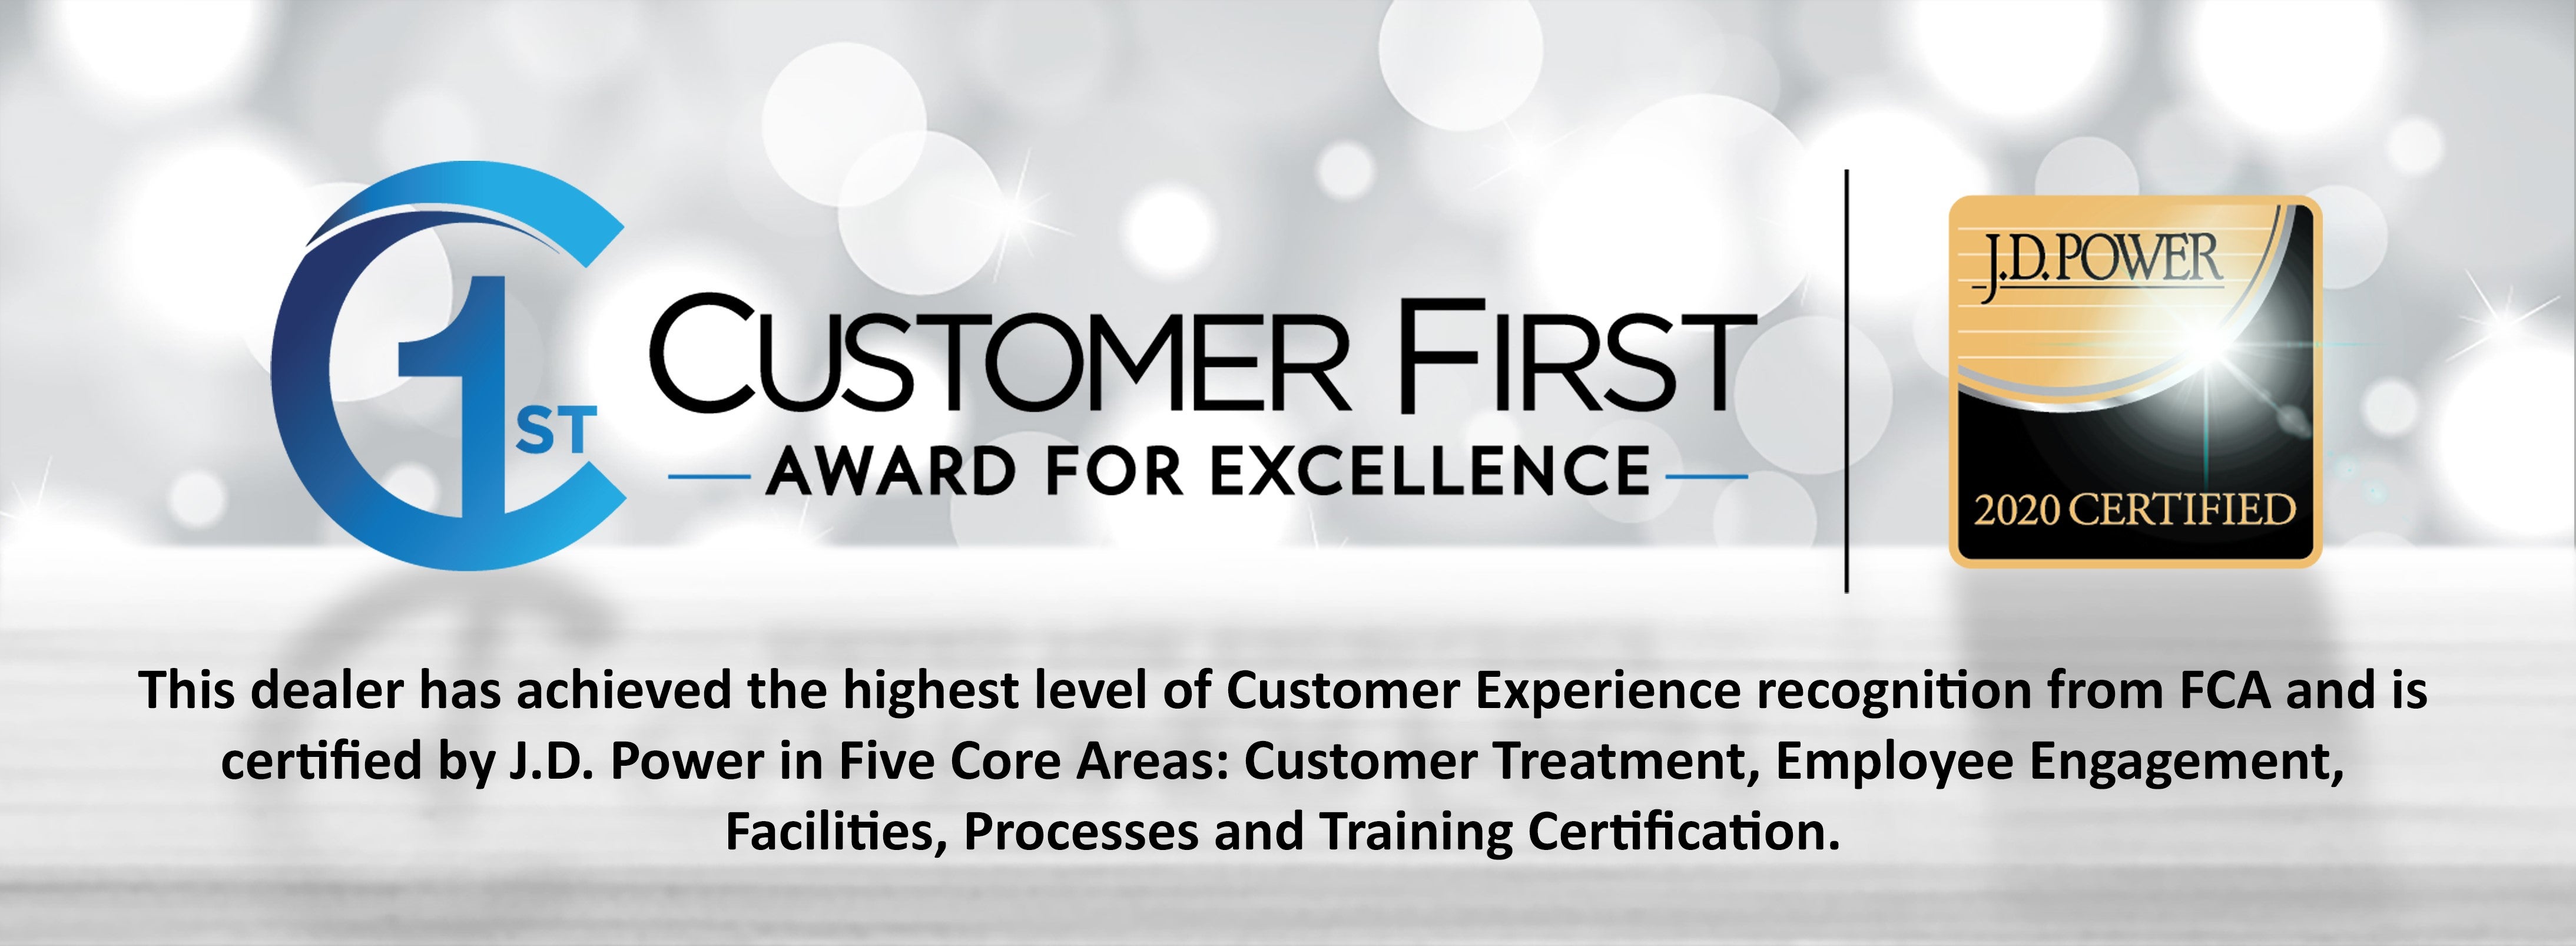 Customer First Award for Excellence for 2019 at Pearl Chrysler Jeep Dodge and Ram in Peotone, IL